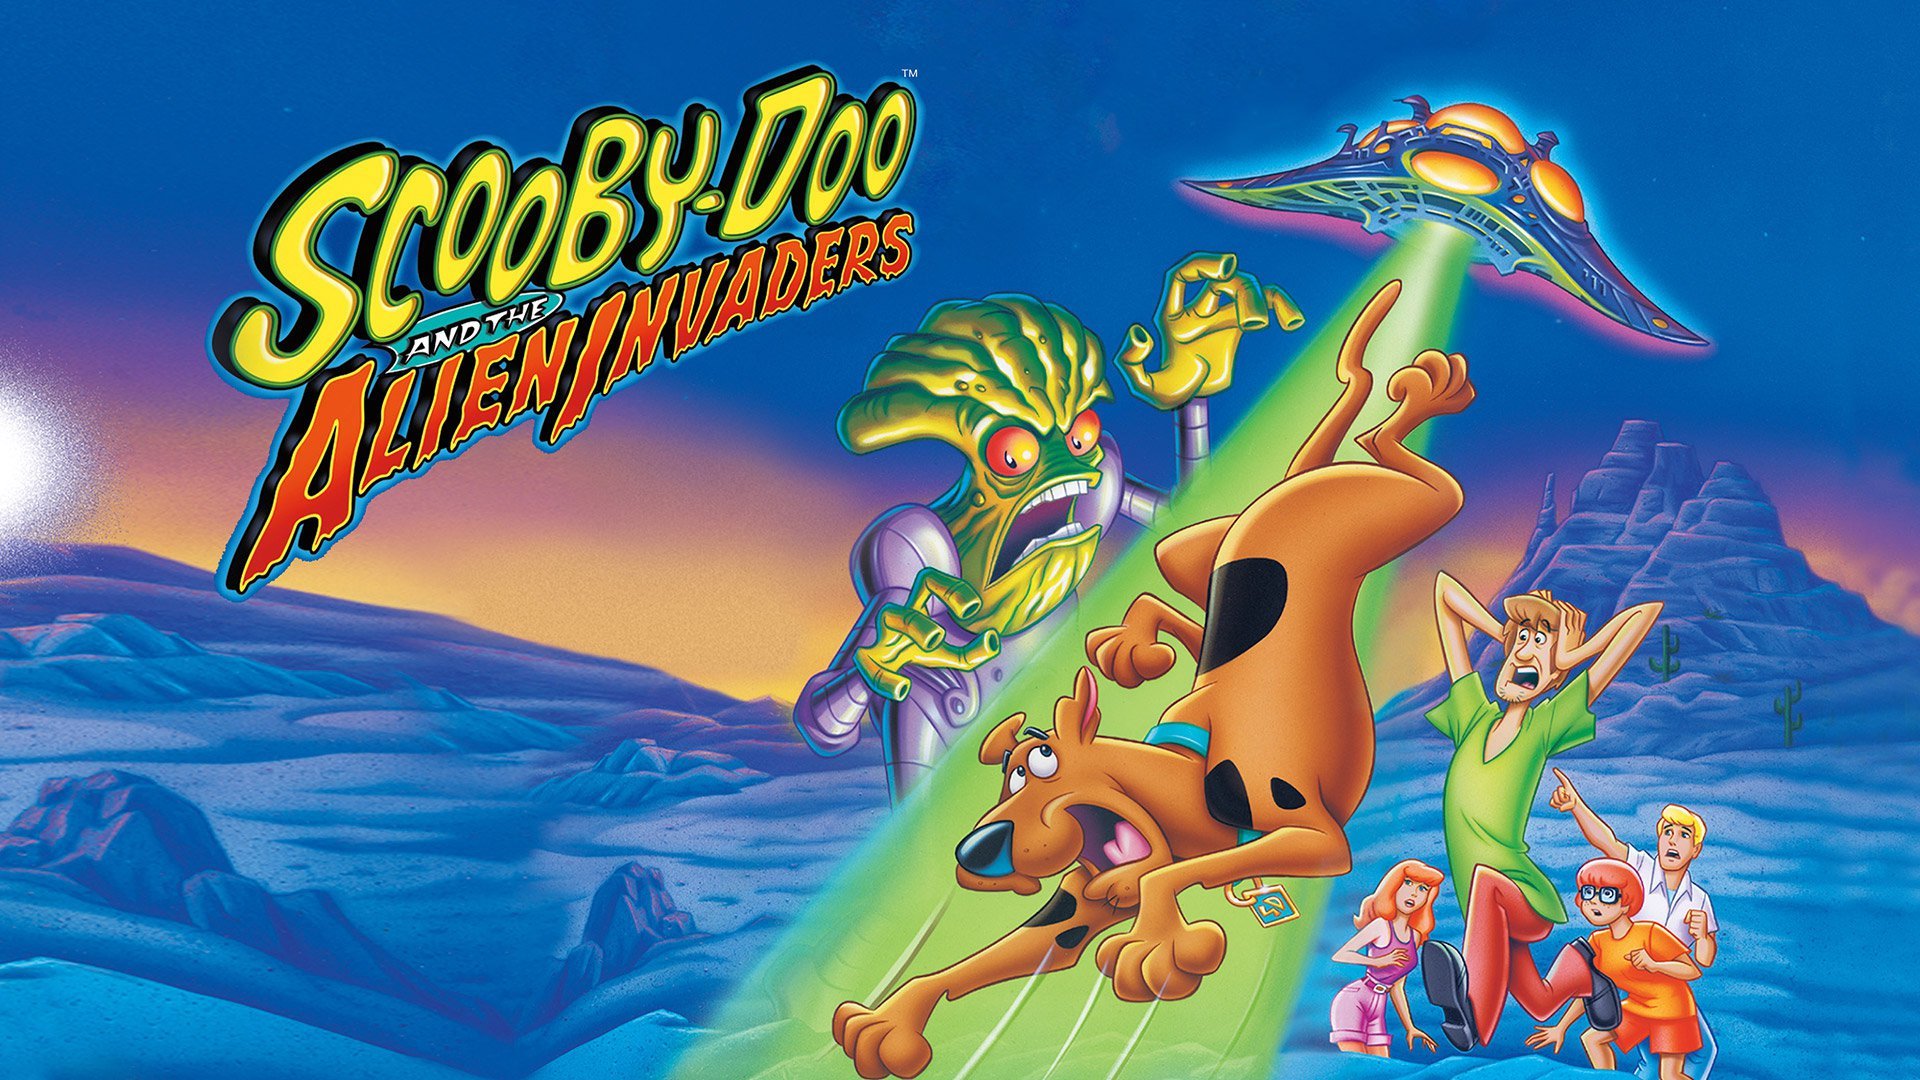 scooby-doo-and-the-alien-invaders-1530001173.jpg.